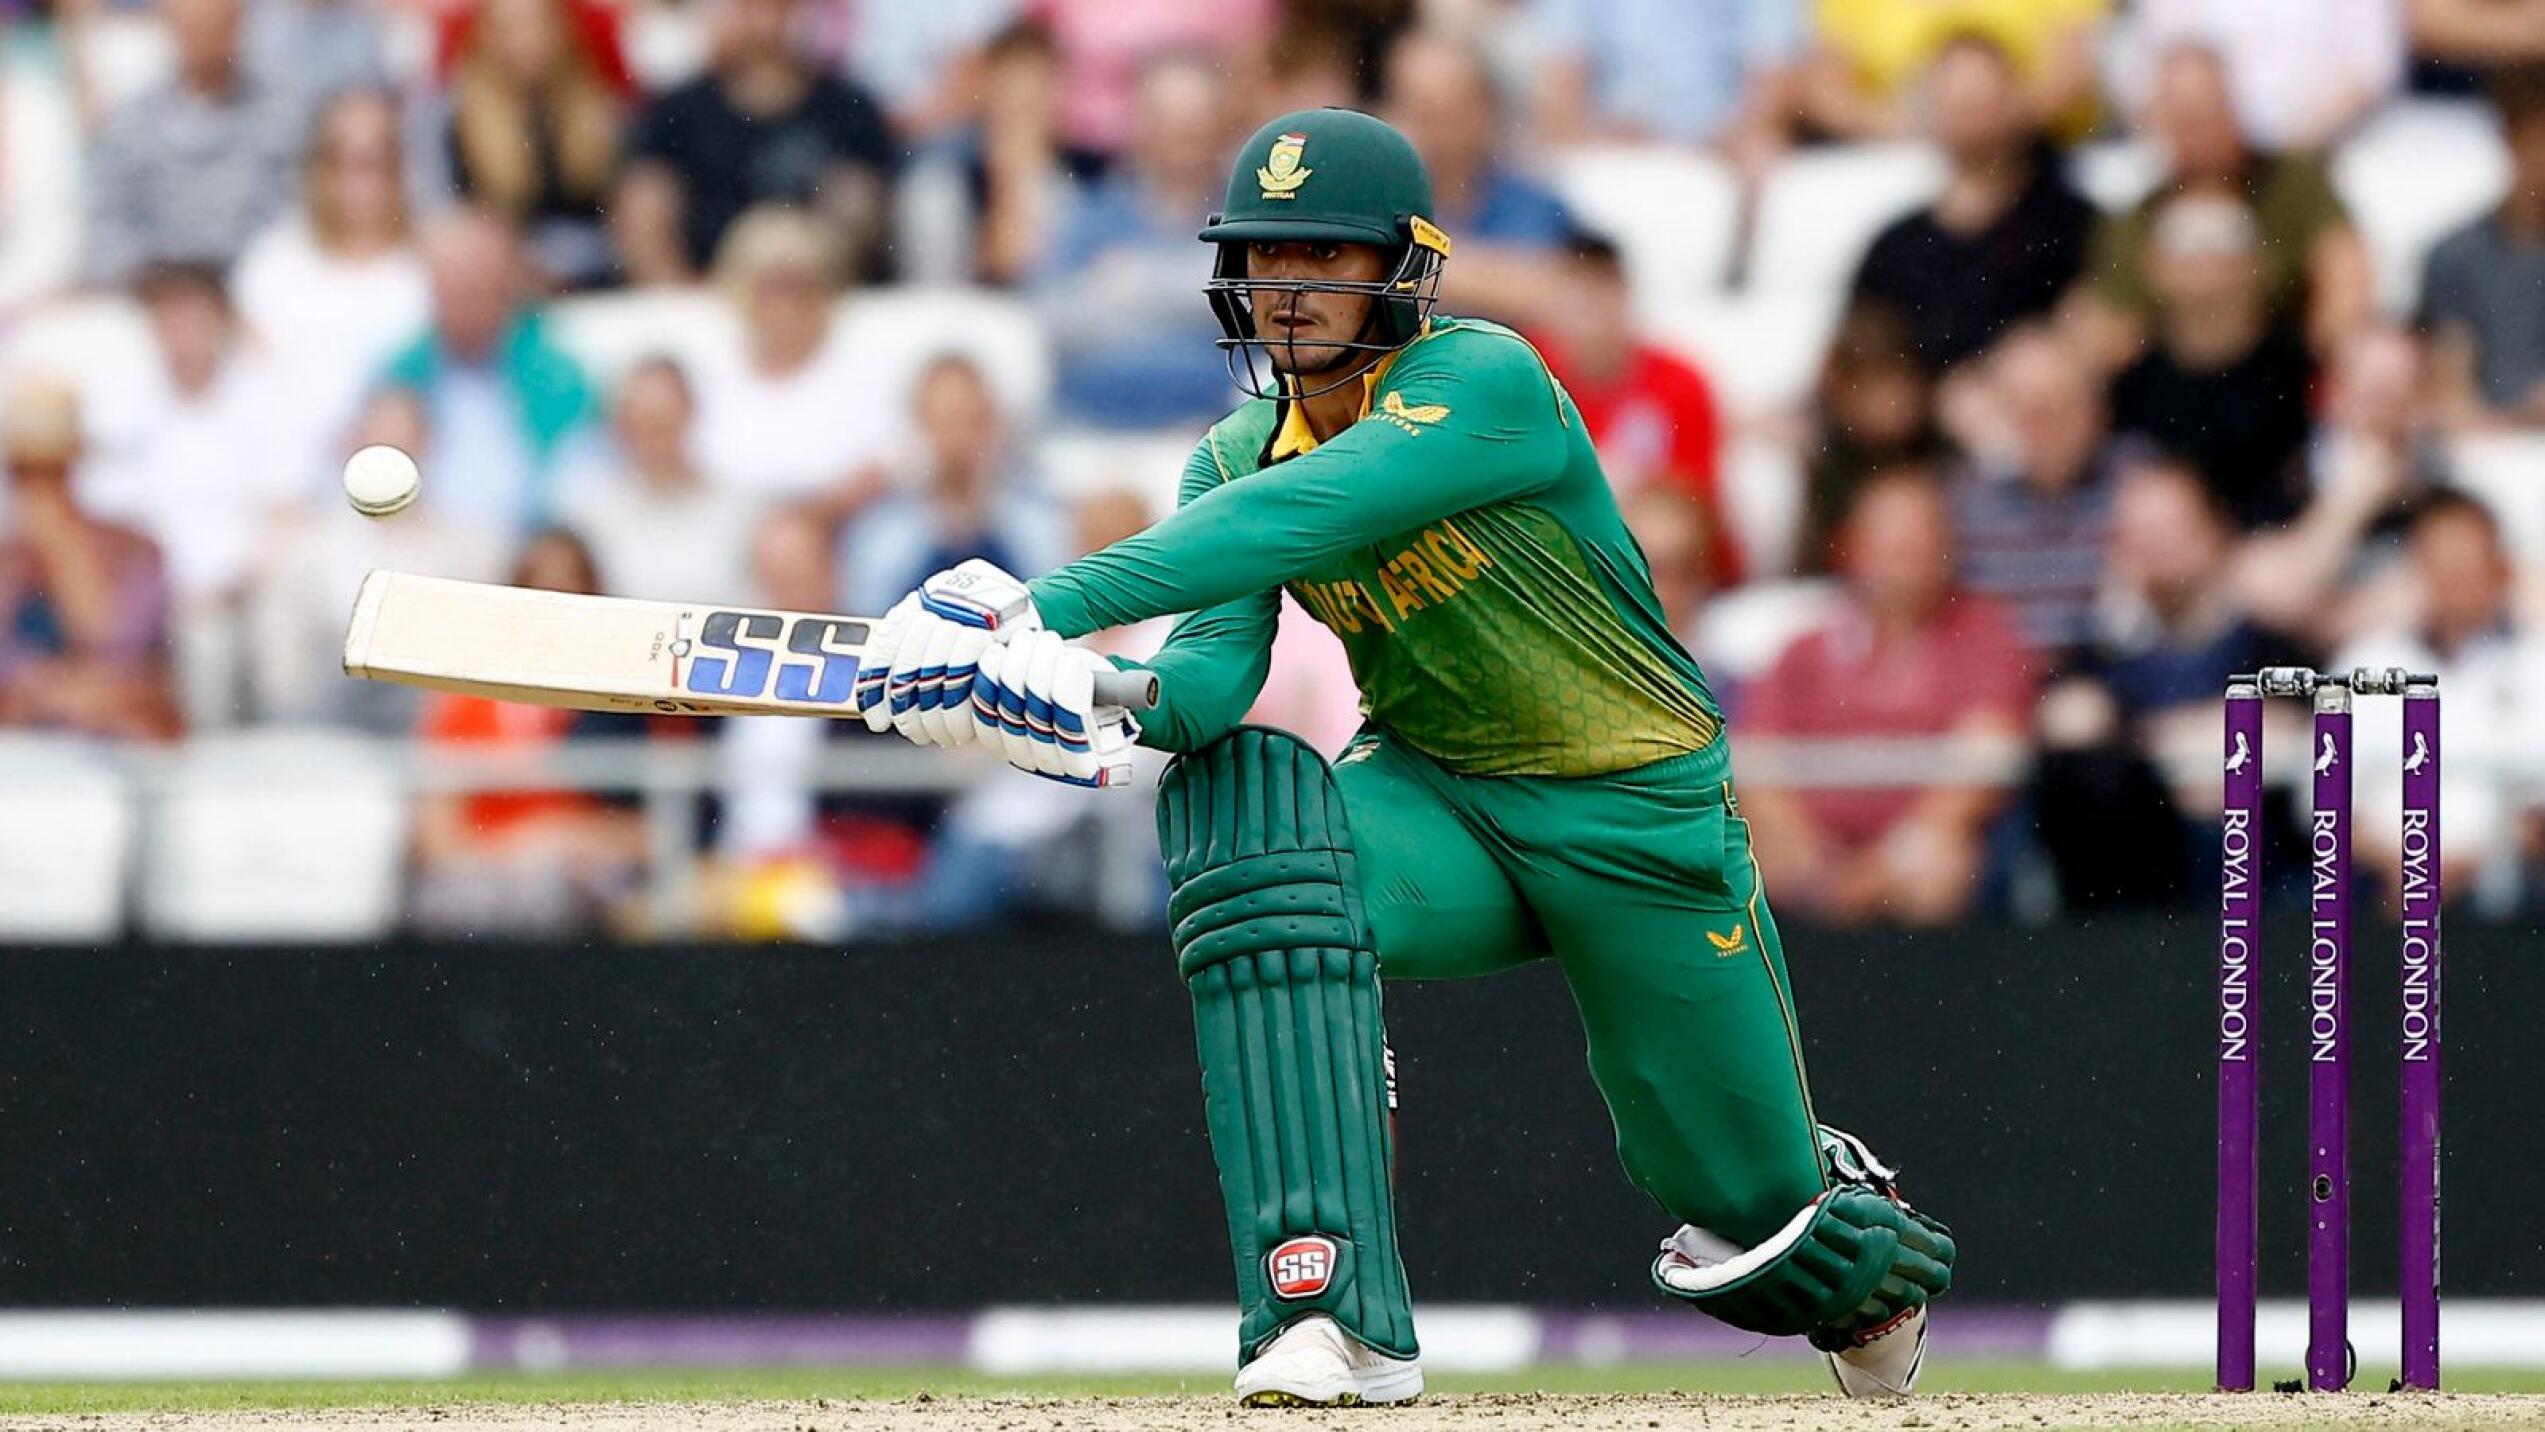 South Africa's Quinton de Kock in action off the bowling of England's Adil Rashid during the third ODI on Sunday